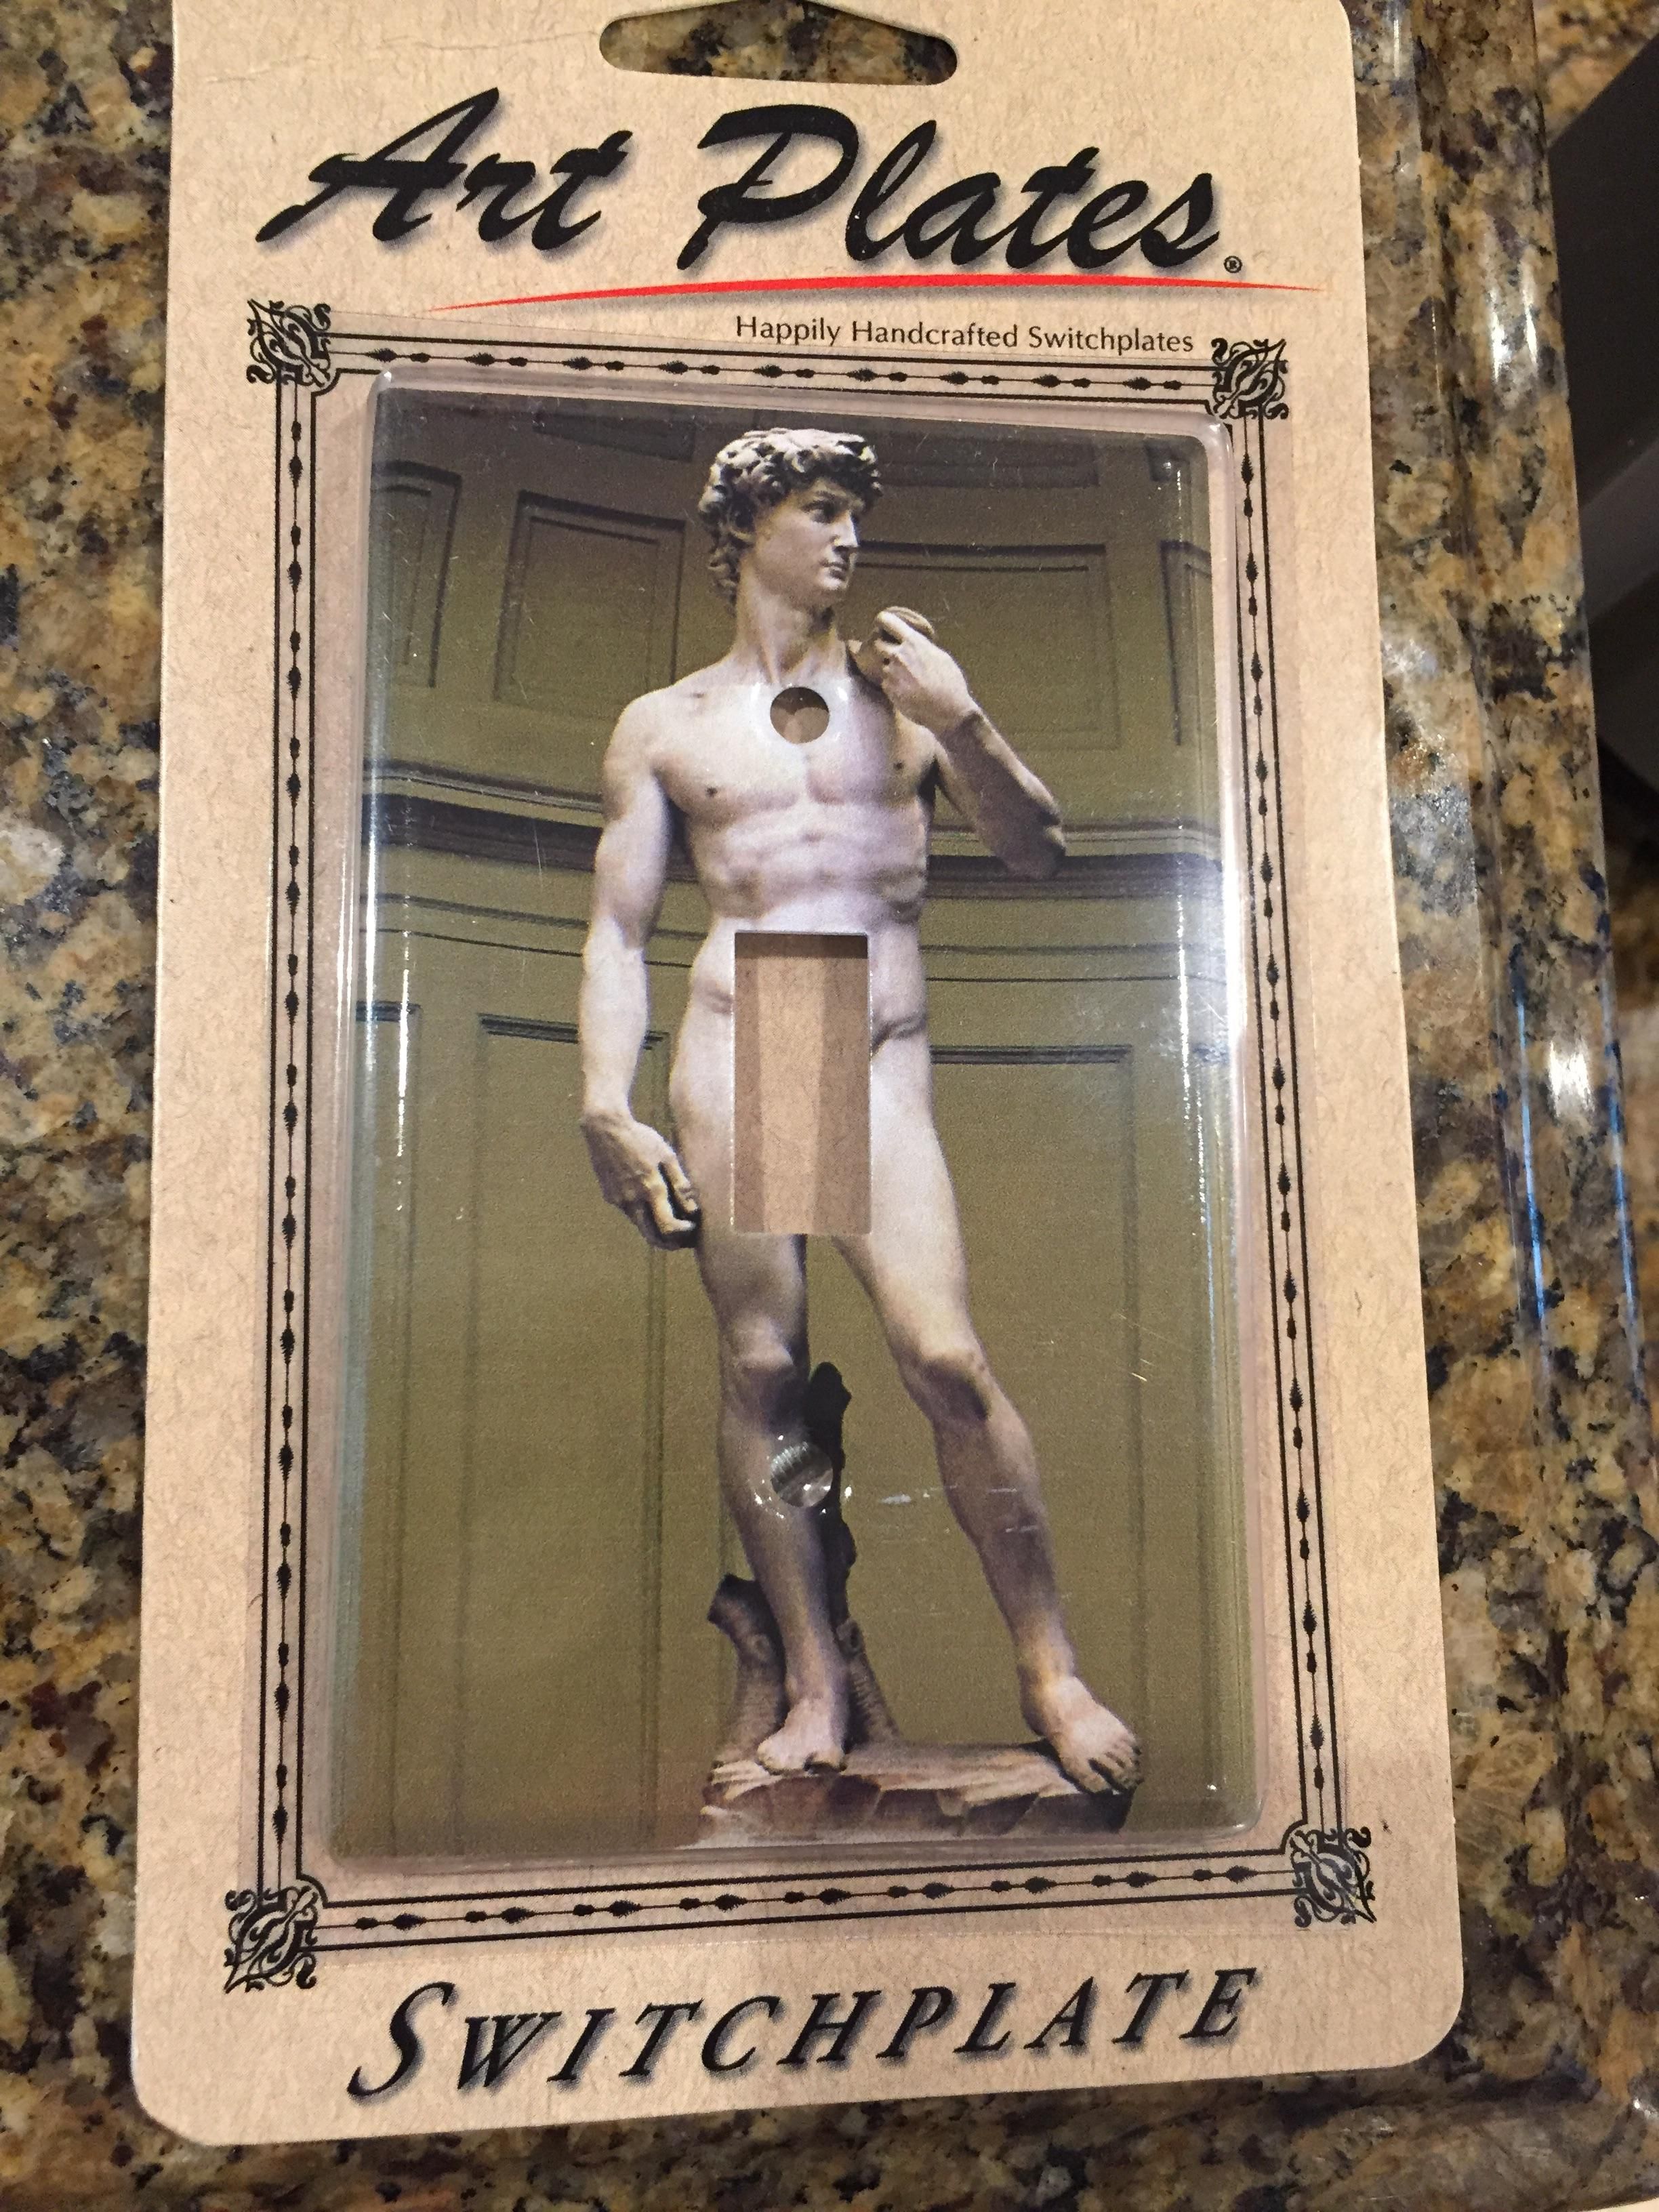 Picked up this little number at a museum gift shop yesterday. Have a buddy's housewarming coming up and plan on sneaking off to install it in the guest bathroom...